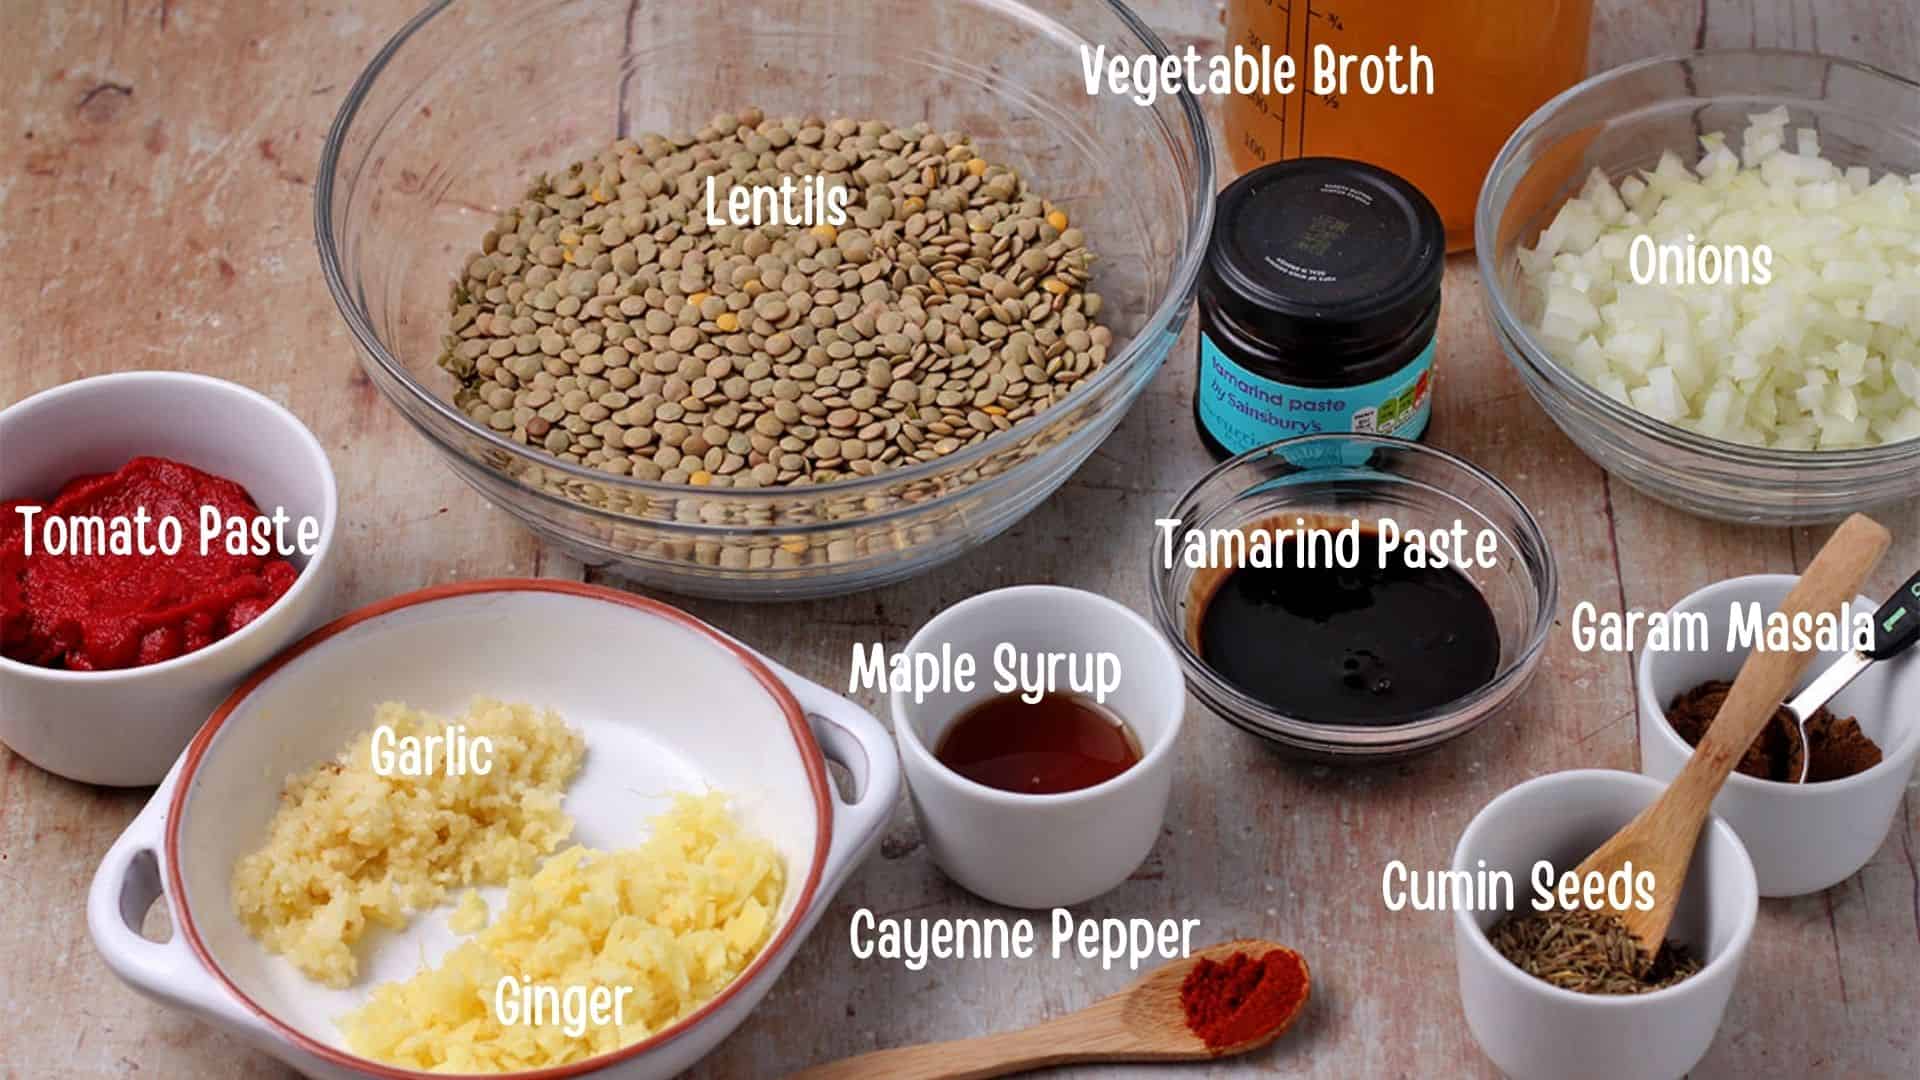 The ingredients for tamarind lentils with captions.